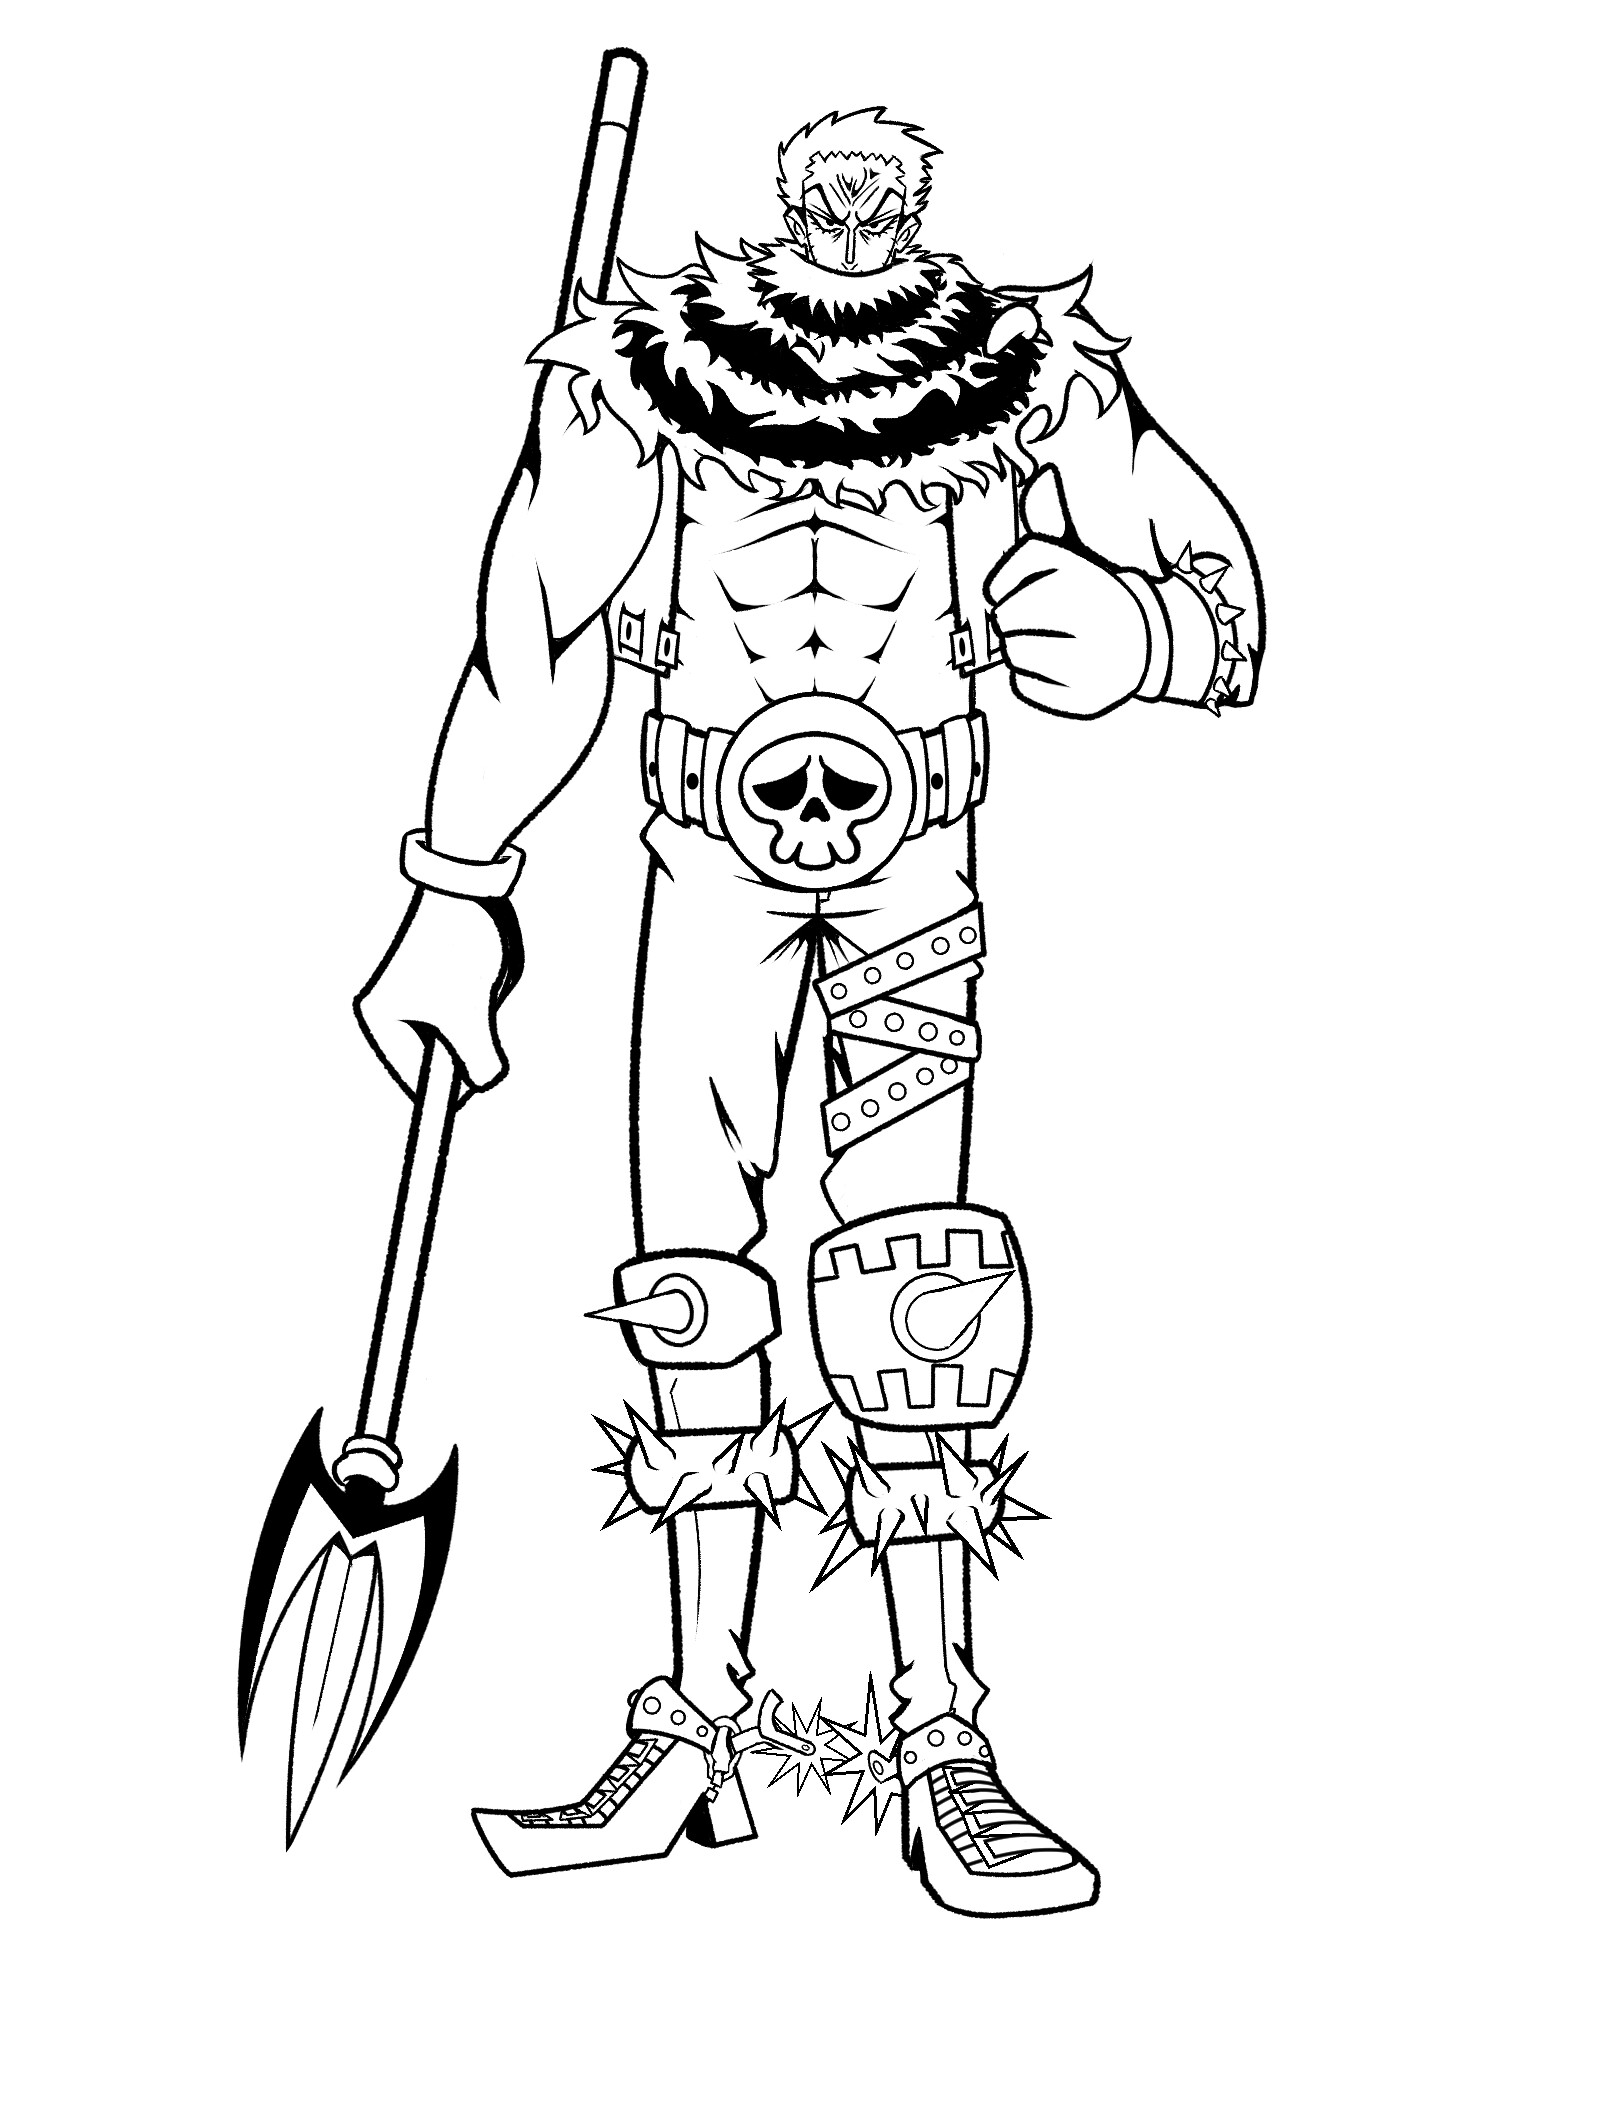 Katakuri One Piece Coloring Page - Anime Coloring Pages